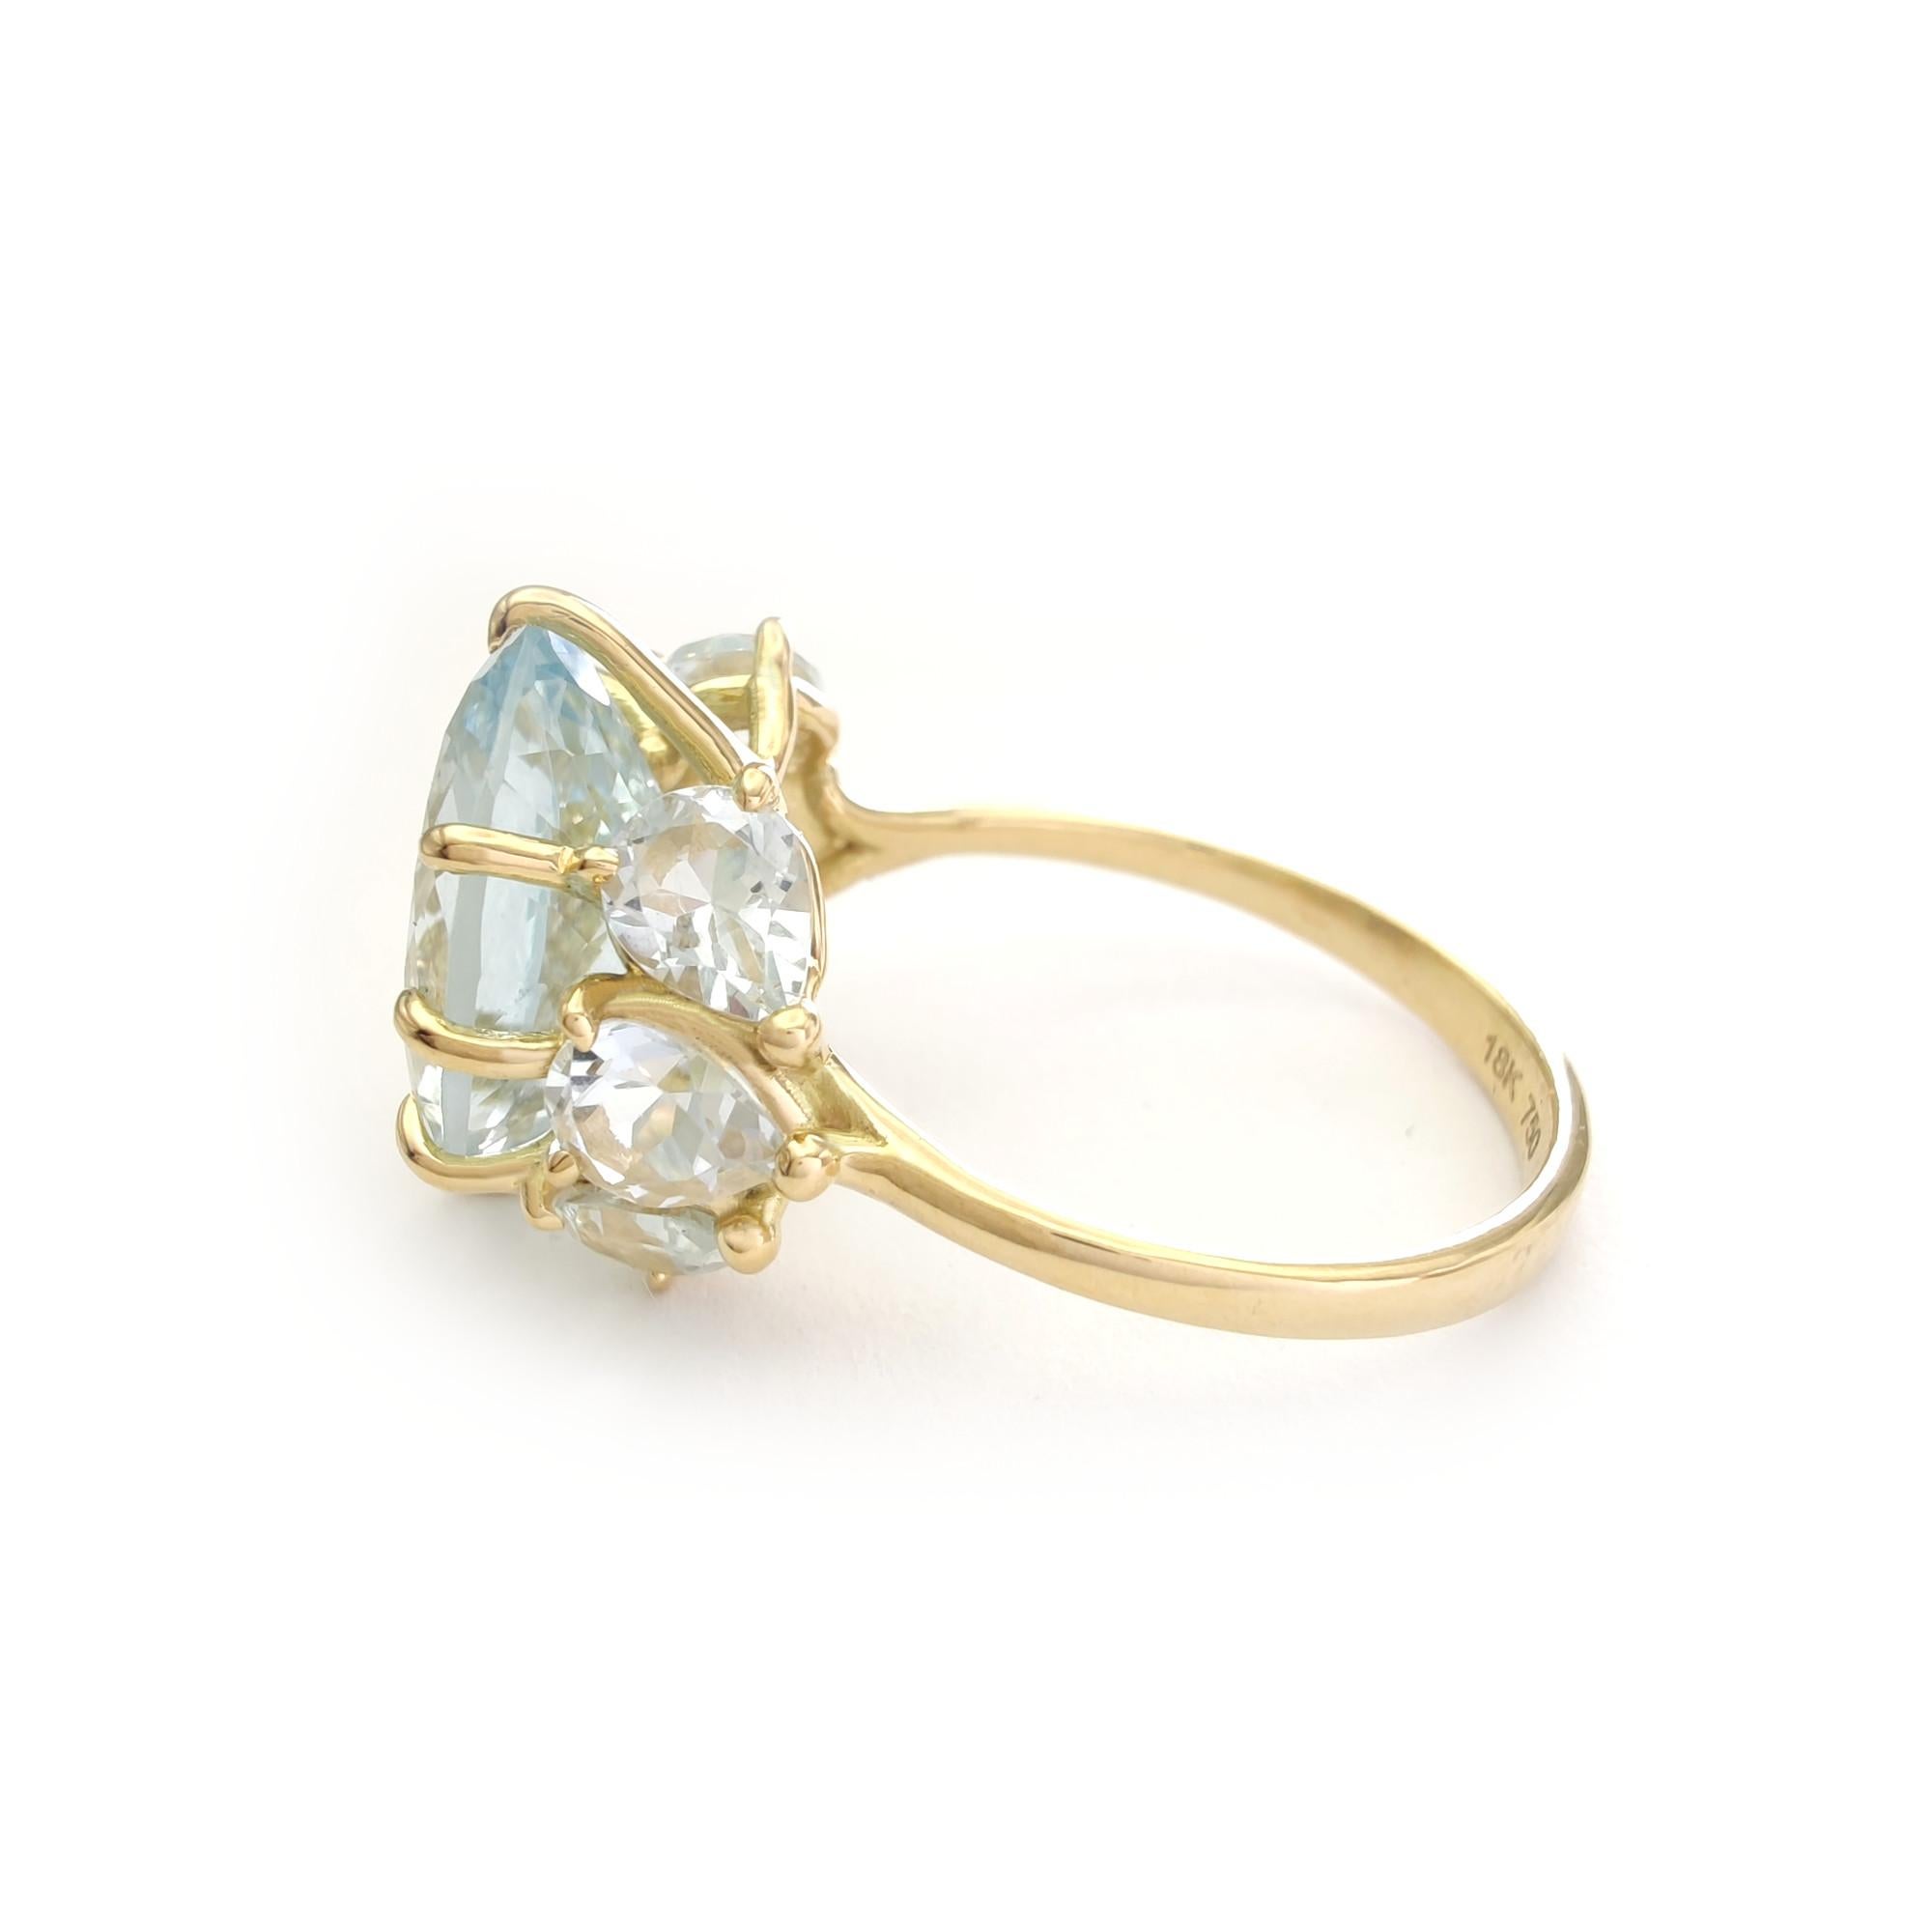 Handmade 4.8 Carat Oval Aquamarine Cocktail Ring in 18K Yellow Gold For Sale 1